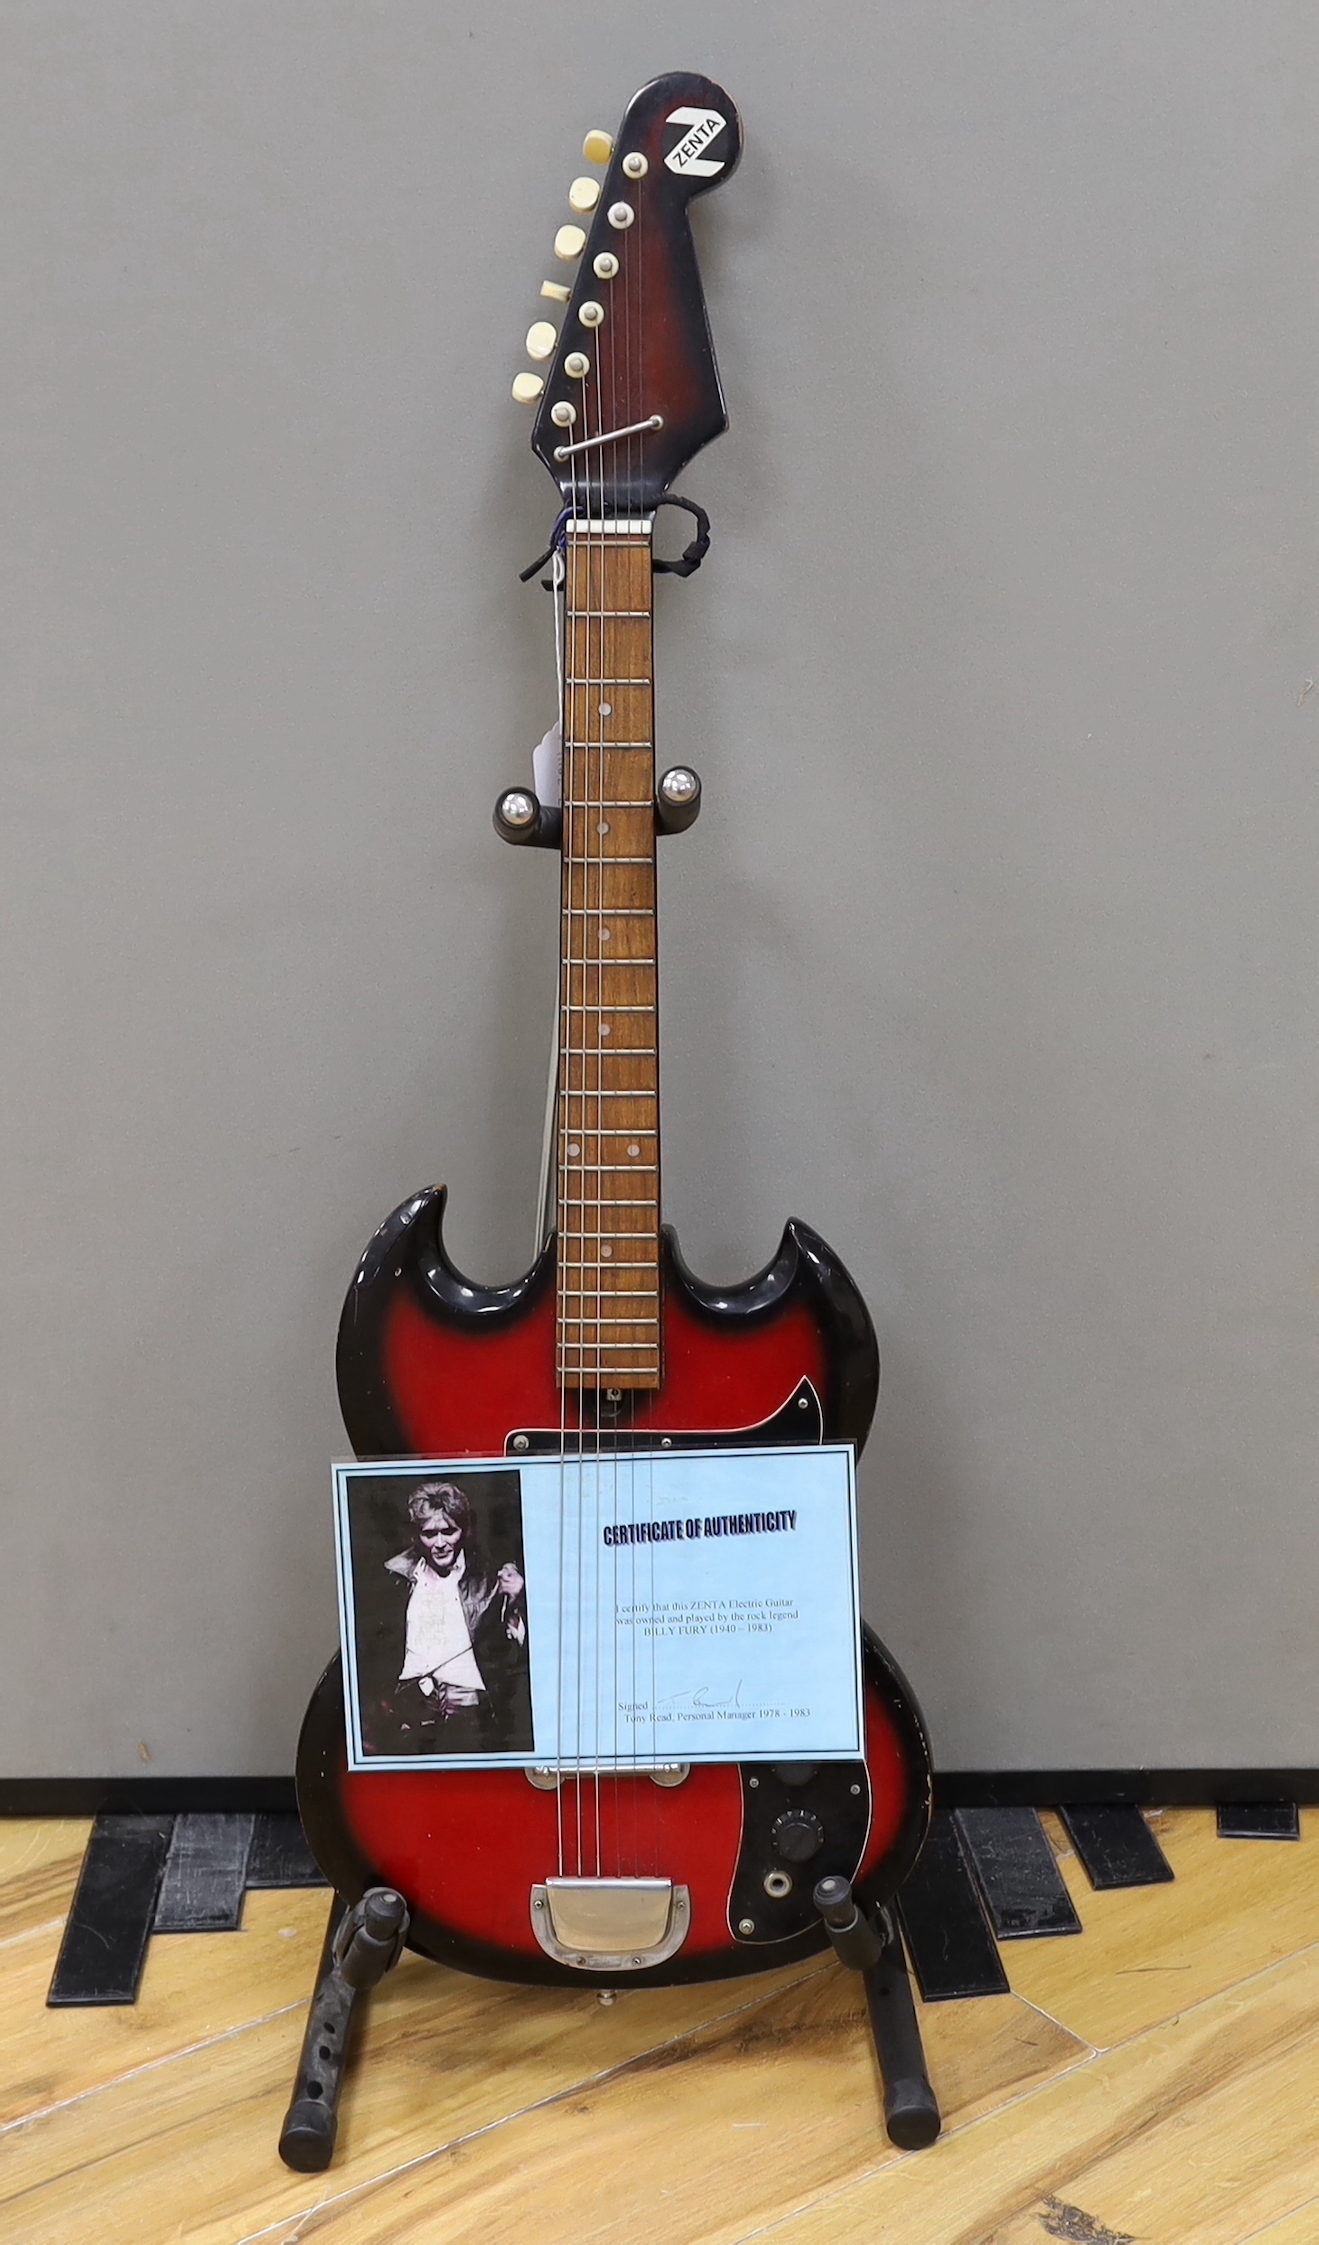 Billy Fury interest; a Zenta electric guitar, understood to be the only electric guitar owned by Billy Fury, together with a certificate of authenticity signed by Tony Read, Fury’s personal manager from 1978 to 1983